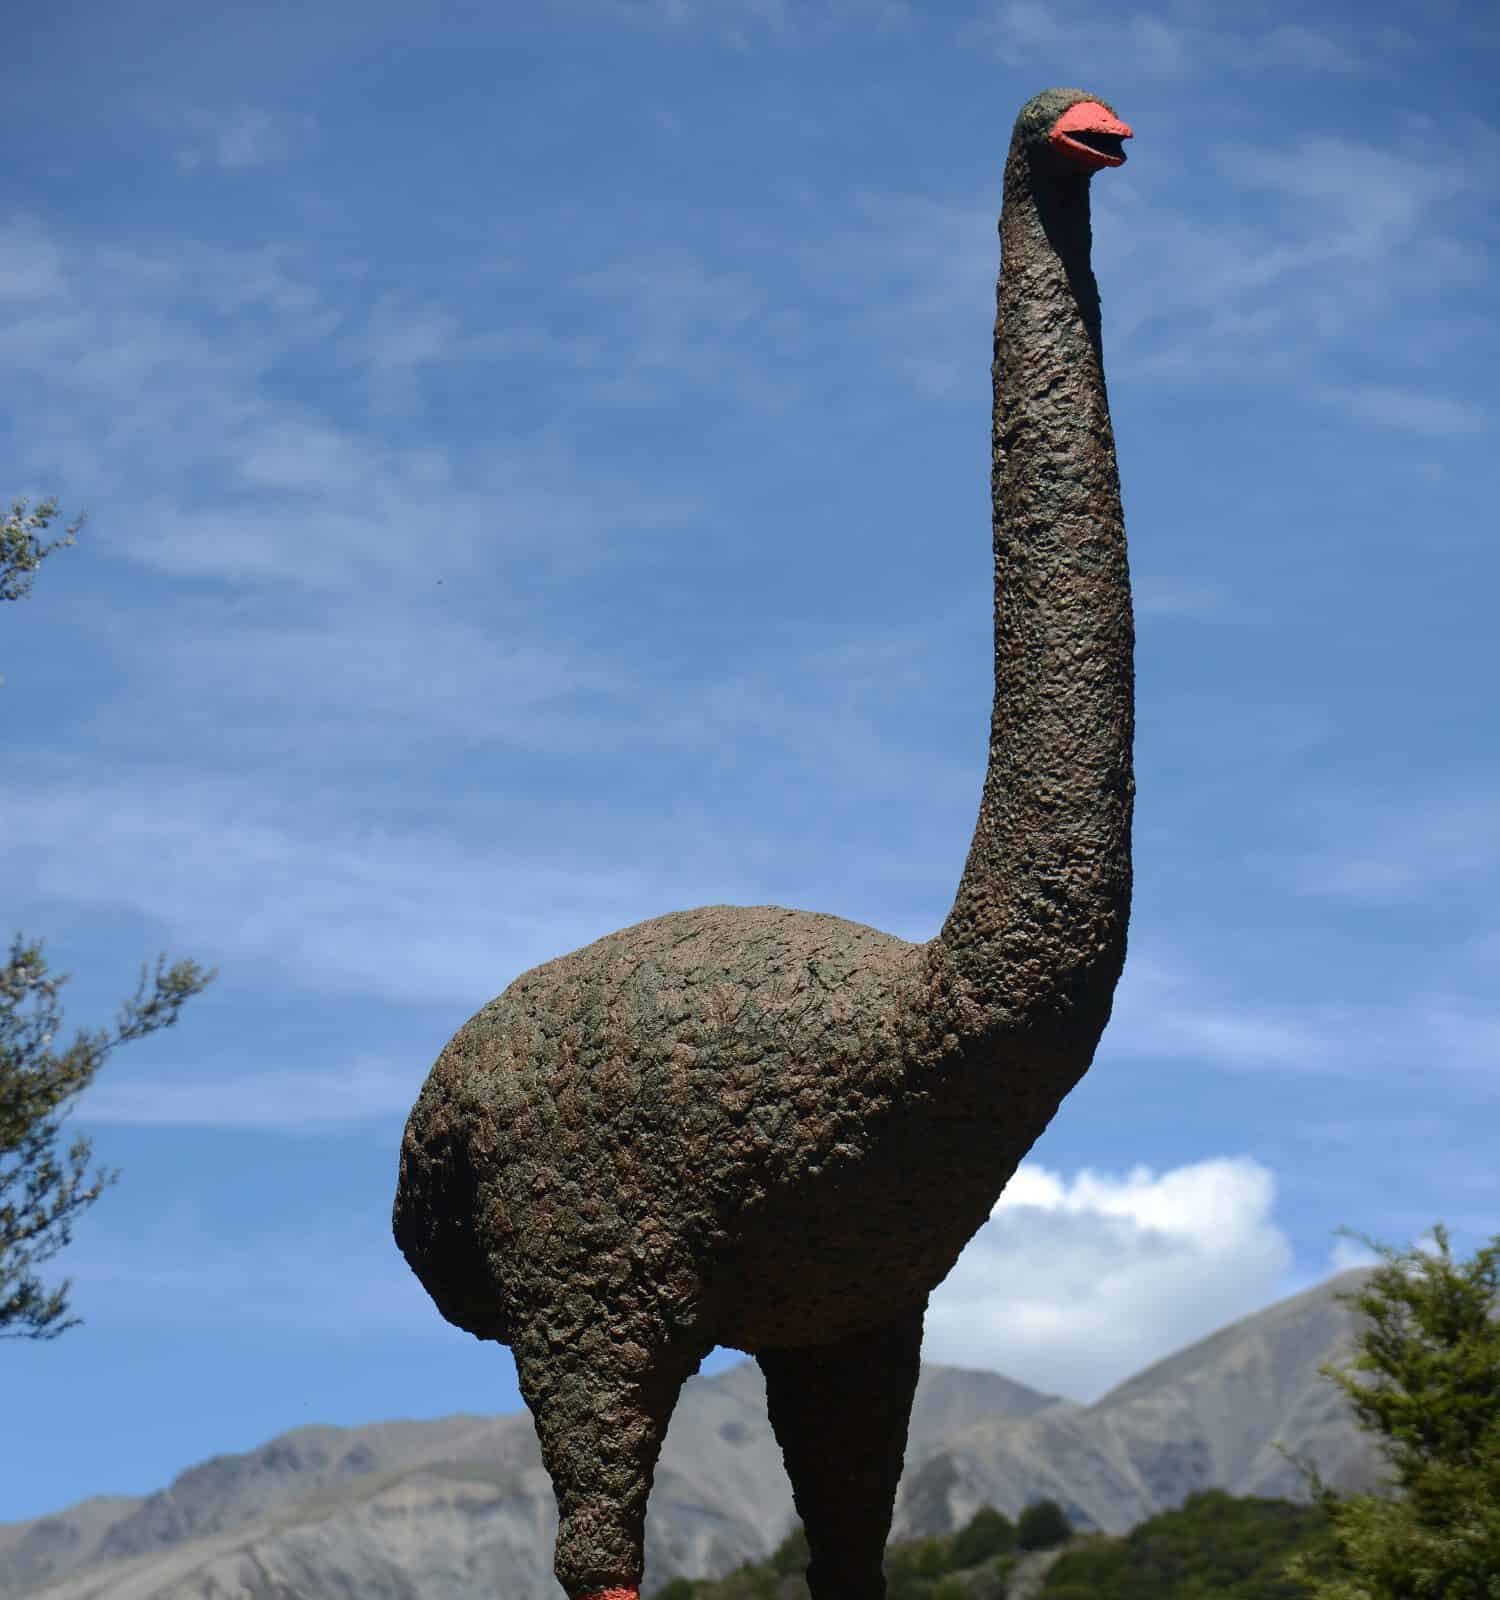 The iconic moa statue at Bealey, New Zealand, welcomes visitors to the West Coast of the South Island. The statue was erected in memory of a recent sighting of the supposedly extinct moa.